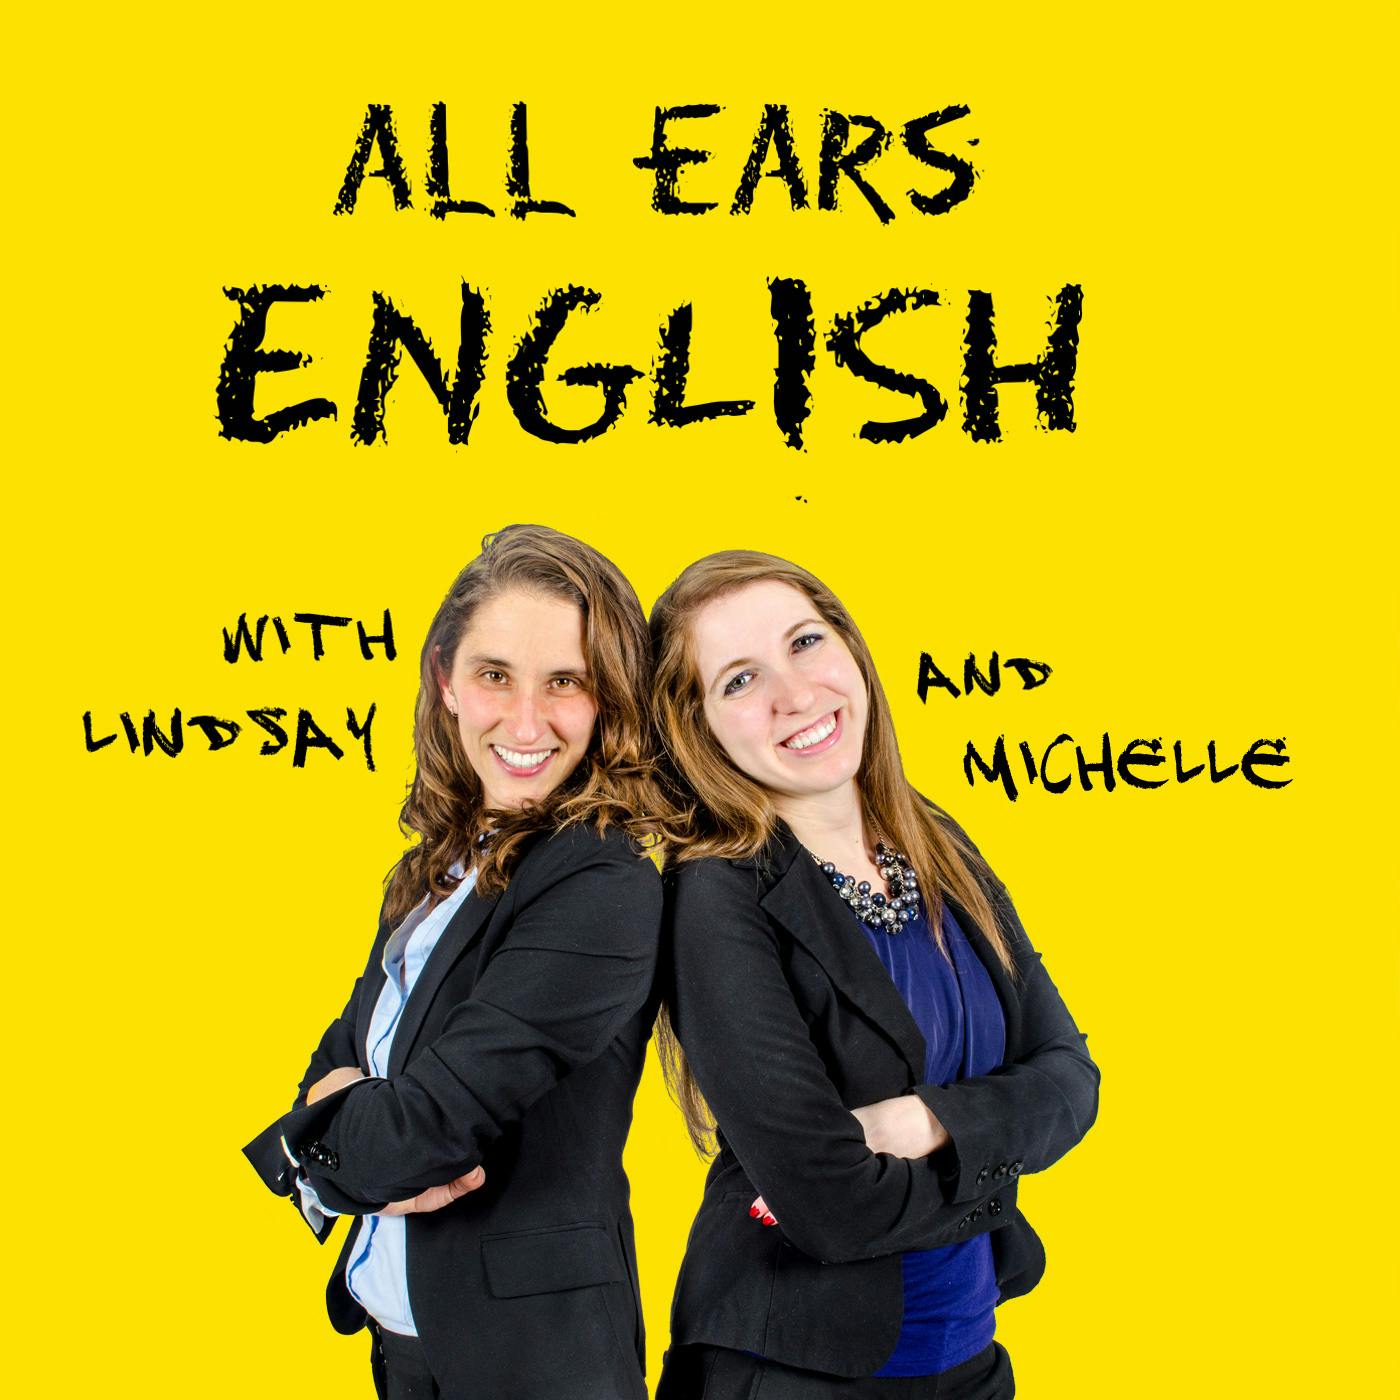 AEE 1243: Less Flashy But More Useful English Vocabulary to Spark Connection